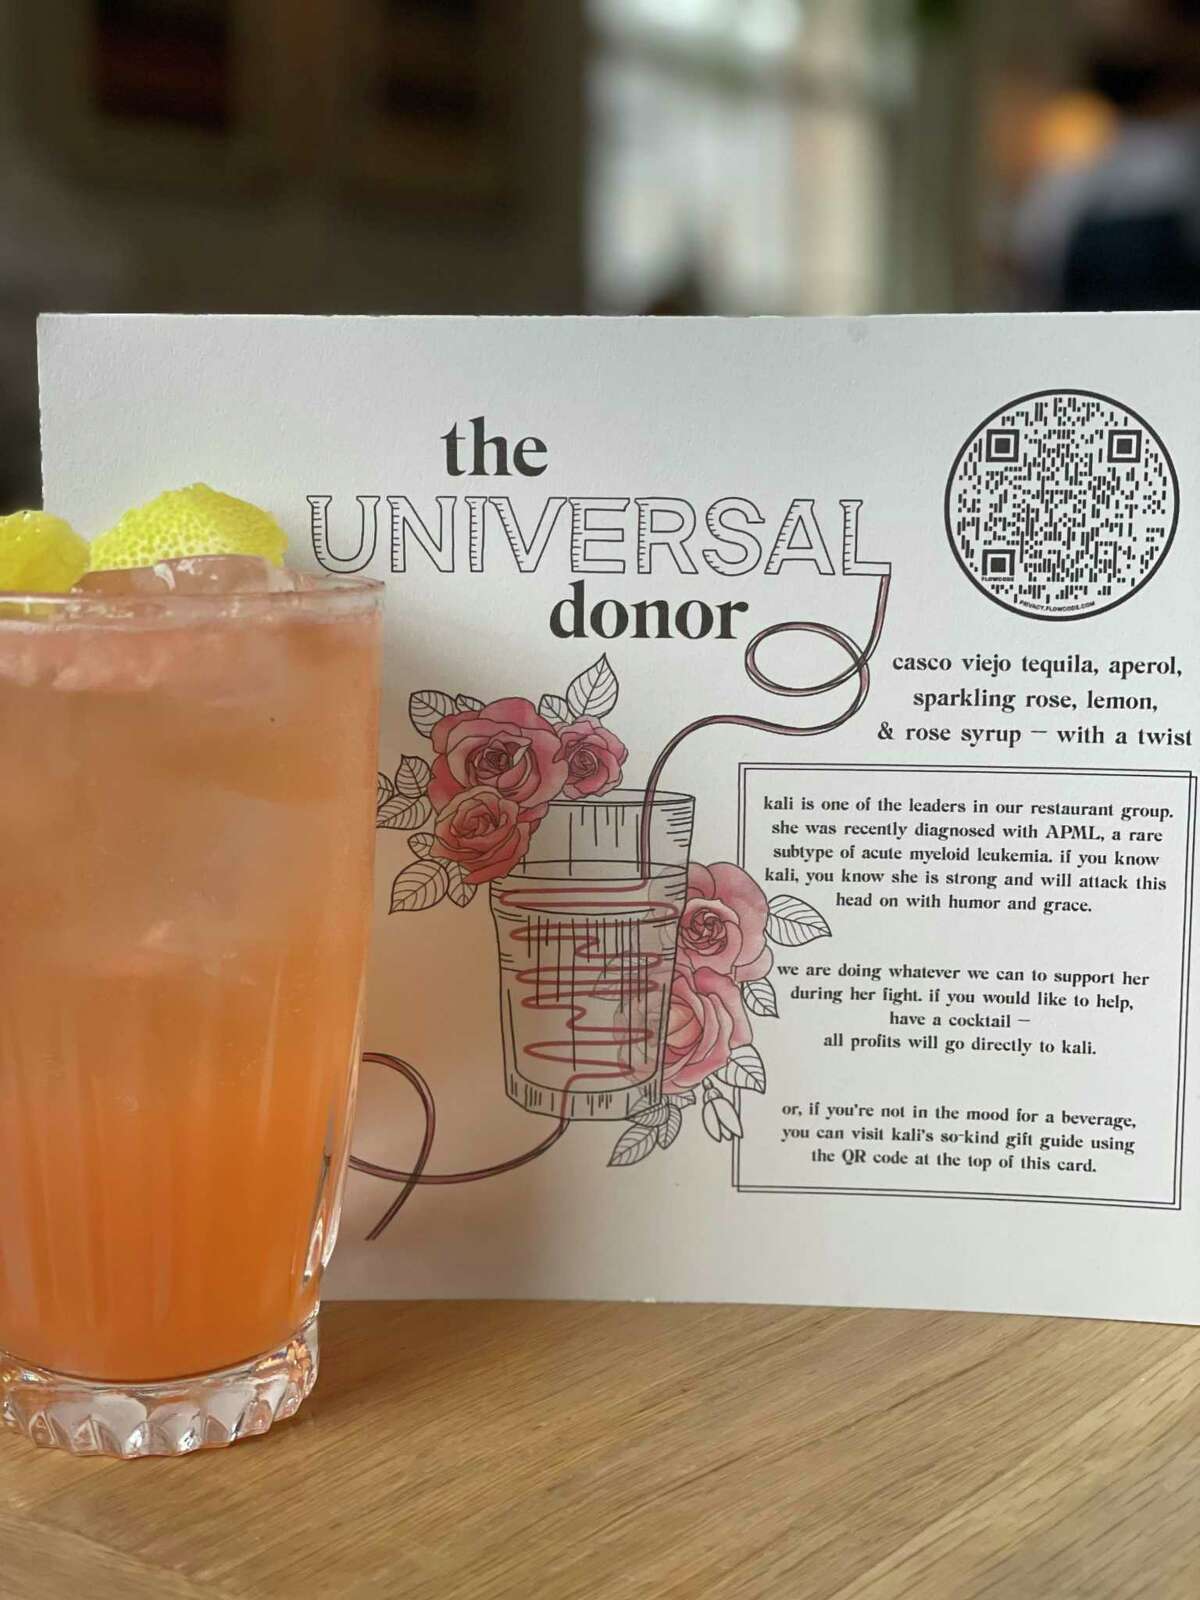 Don Memo in Westport has created a new cocktail called "The Universal Donor" in support of their employee Kali Pulkkinen, who was recently diagnosed with leukemia.